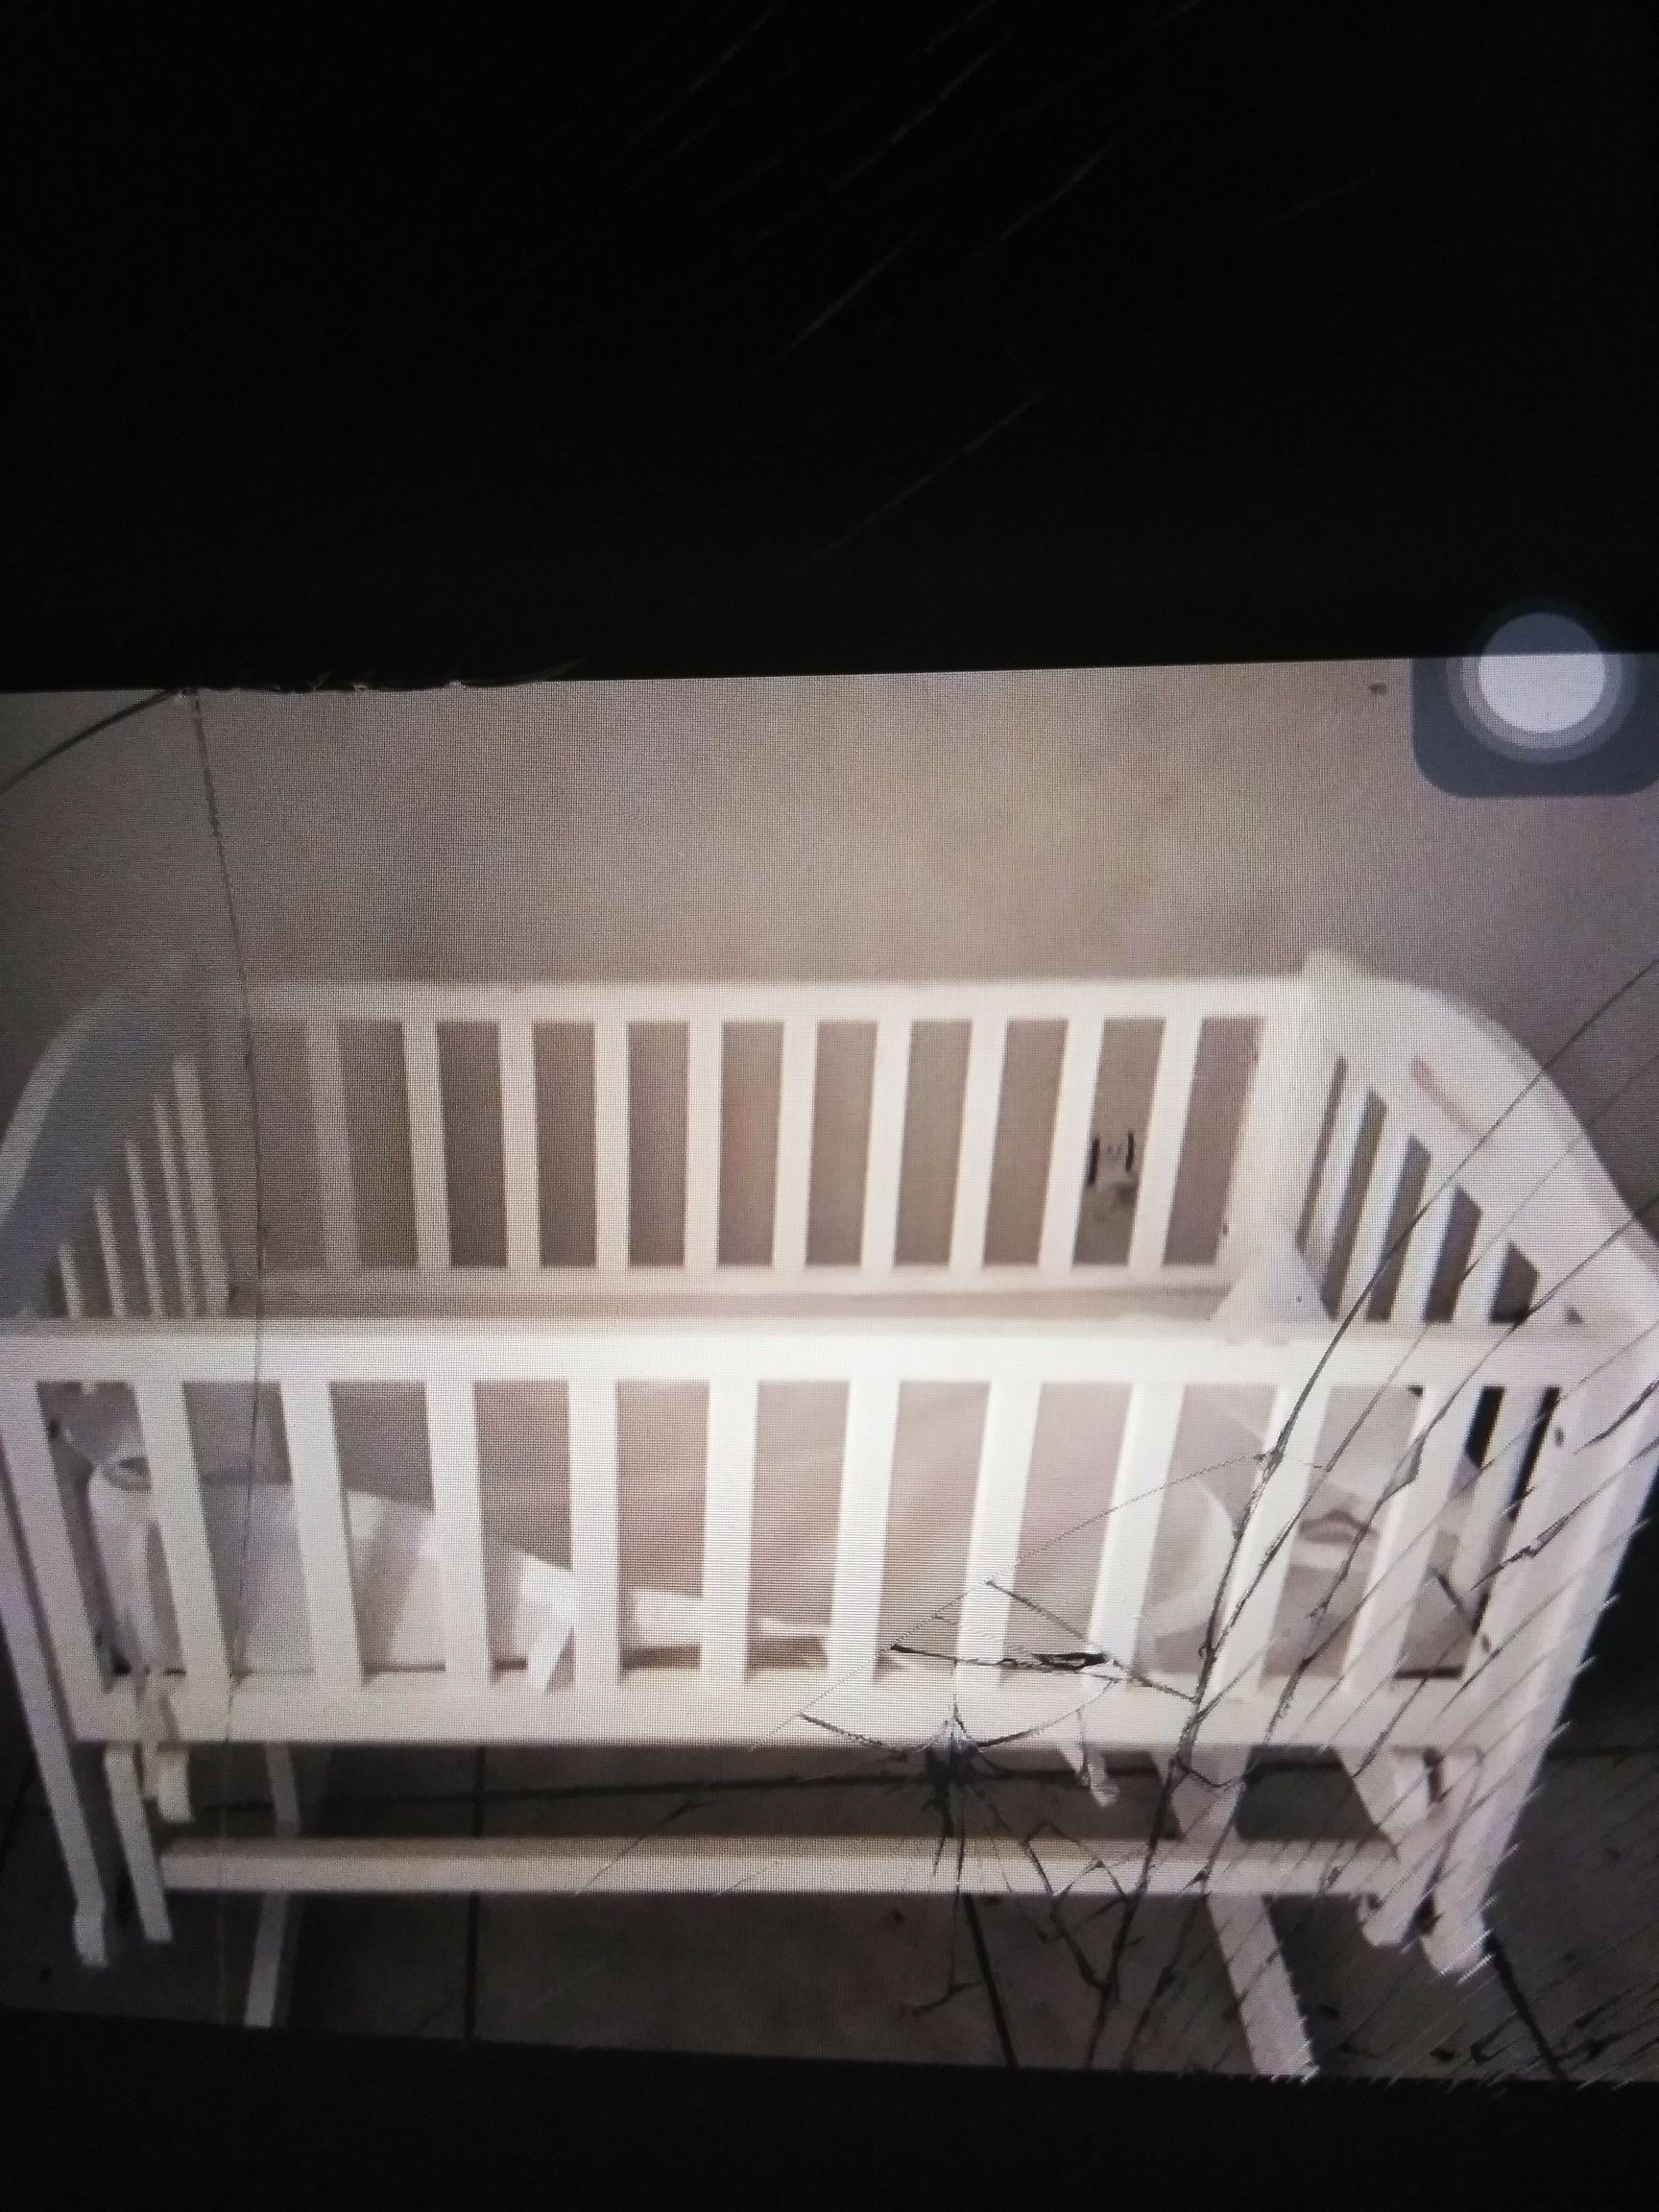 Rocker bassinet crib good condition.baby clothes included